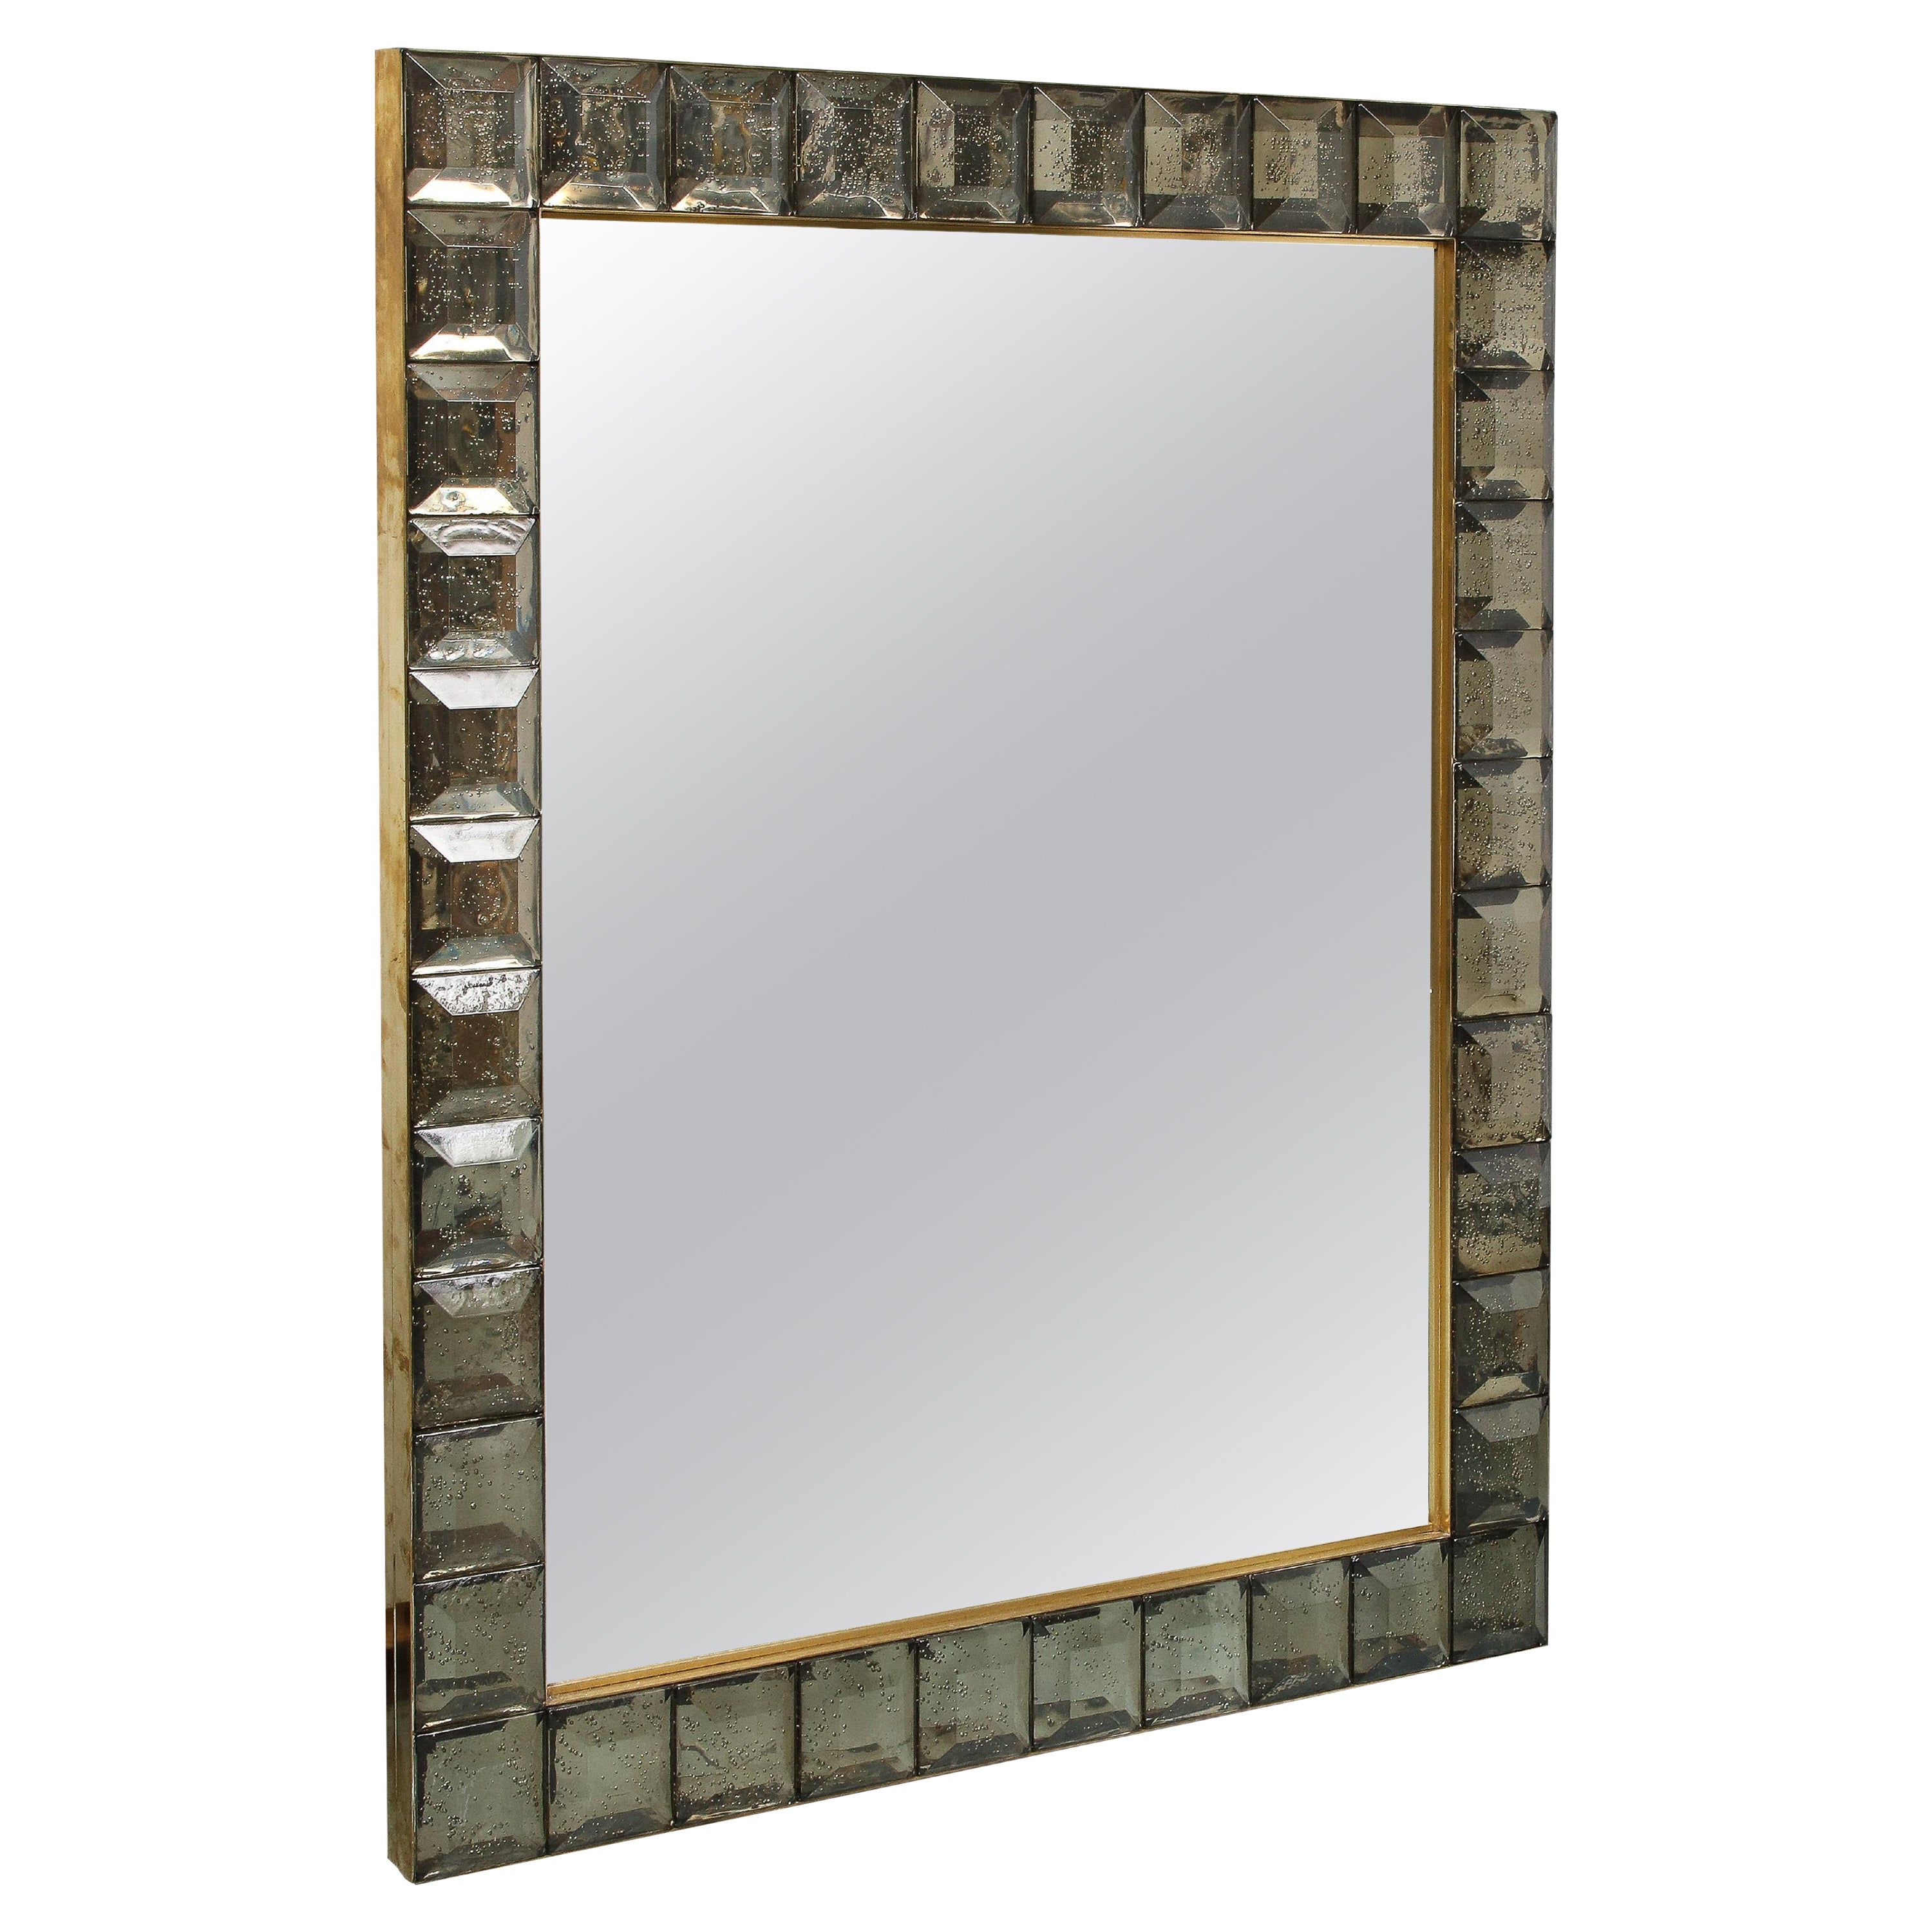 Handcrafted by a team of Italian artisans, this mirror was designed all in glass. The frame is made with smoked cut diamond squares and the periphery of the mirror of gold brass. The effect is spectacular and chic. It can fit in different interiors